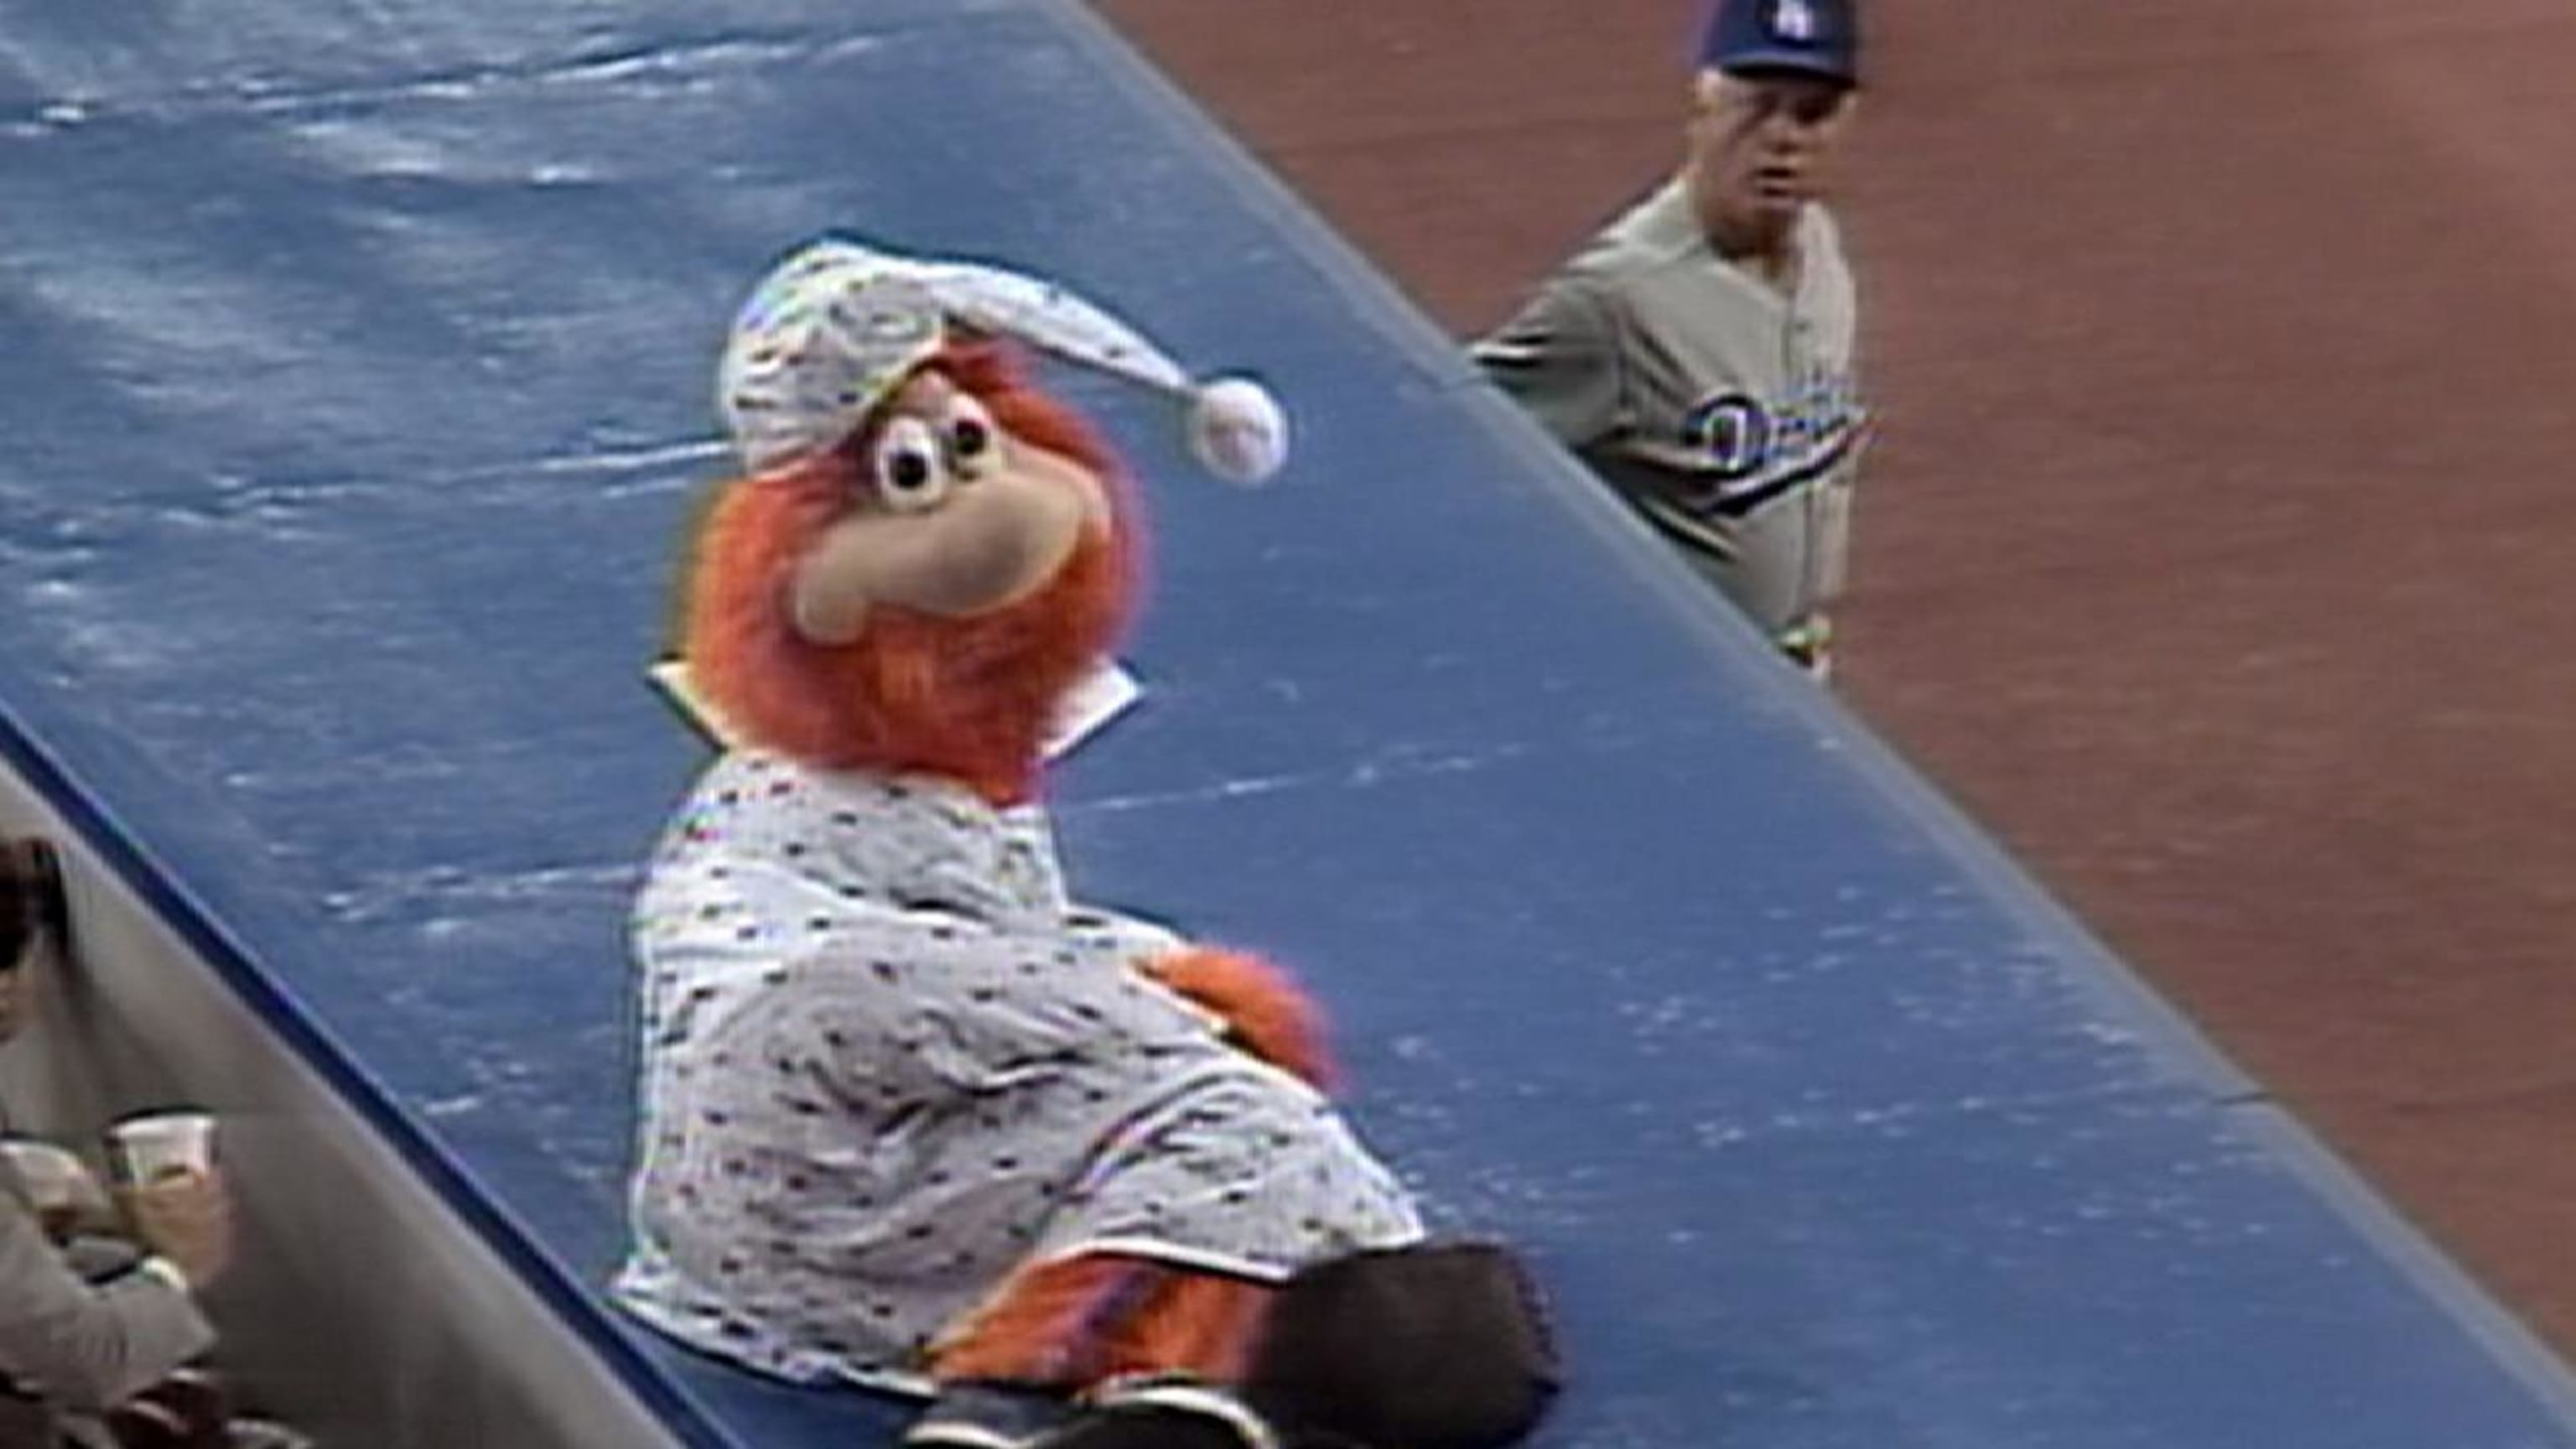 Yankees' mascot takes his old team to court, News